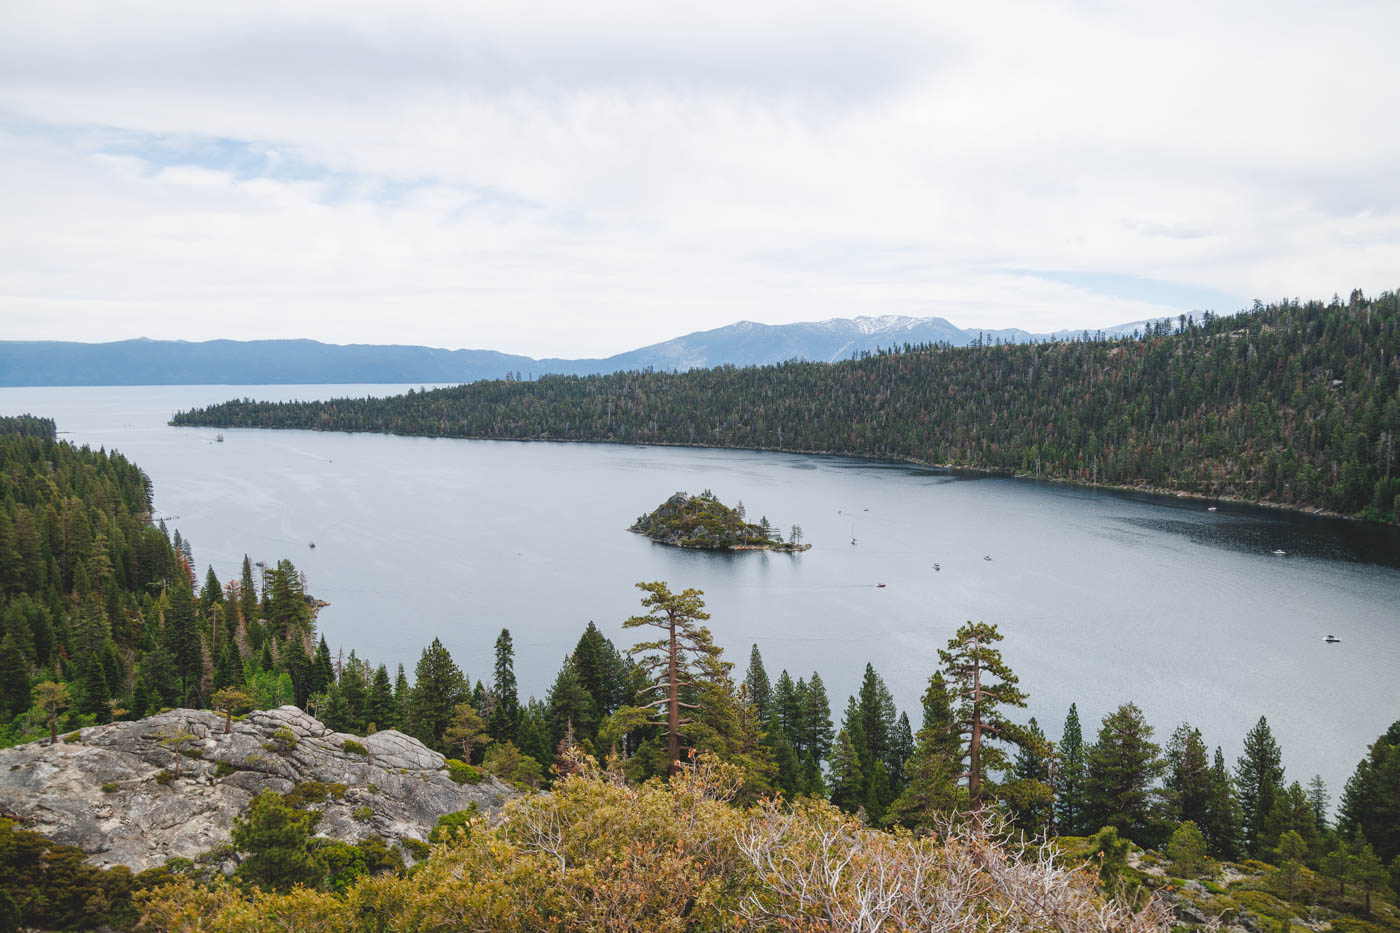 A view over the lake, forests and mountains of Emerald Bay State Park from the lookout.